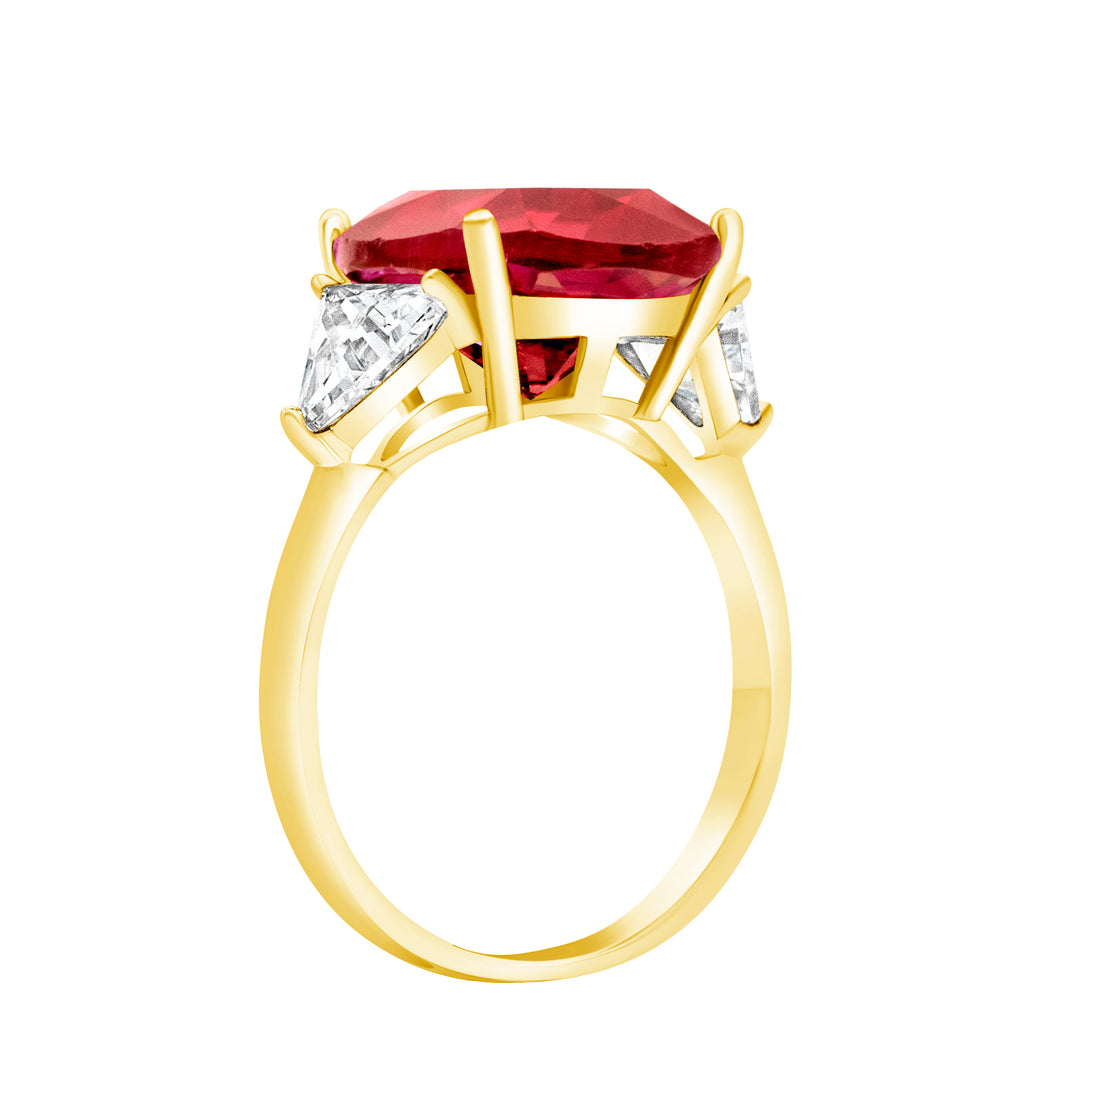 Silver, Gold Plated with Red Zircon Ring